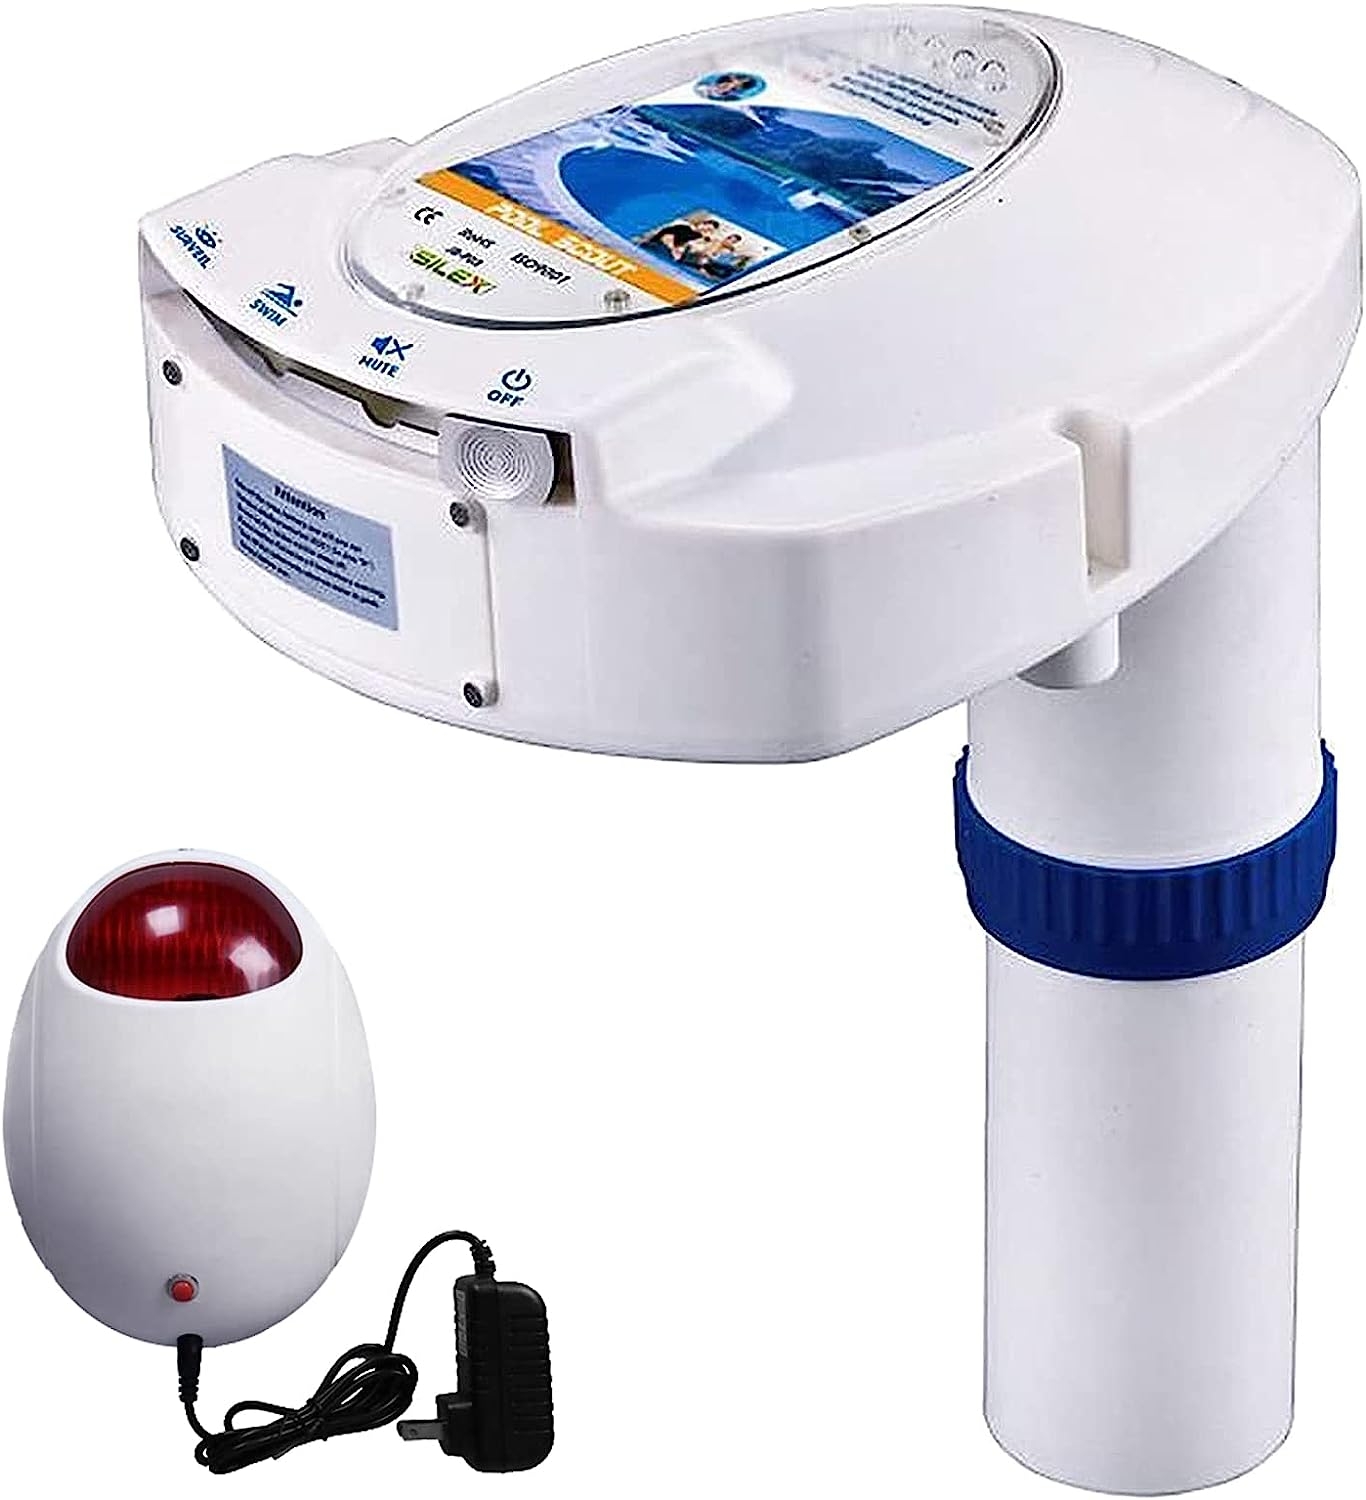 Pool Alarm, HOMEYA Rechargeable Battery Powered Smart Inground/Aboveground Immersion Pool Alarm System Safety Remote Receiver,